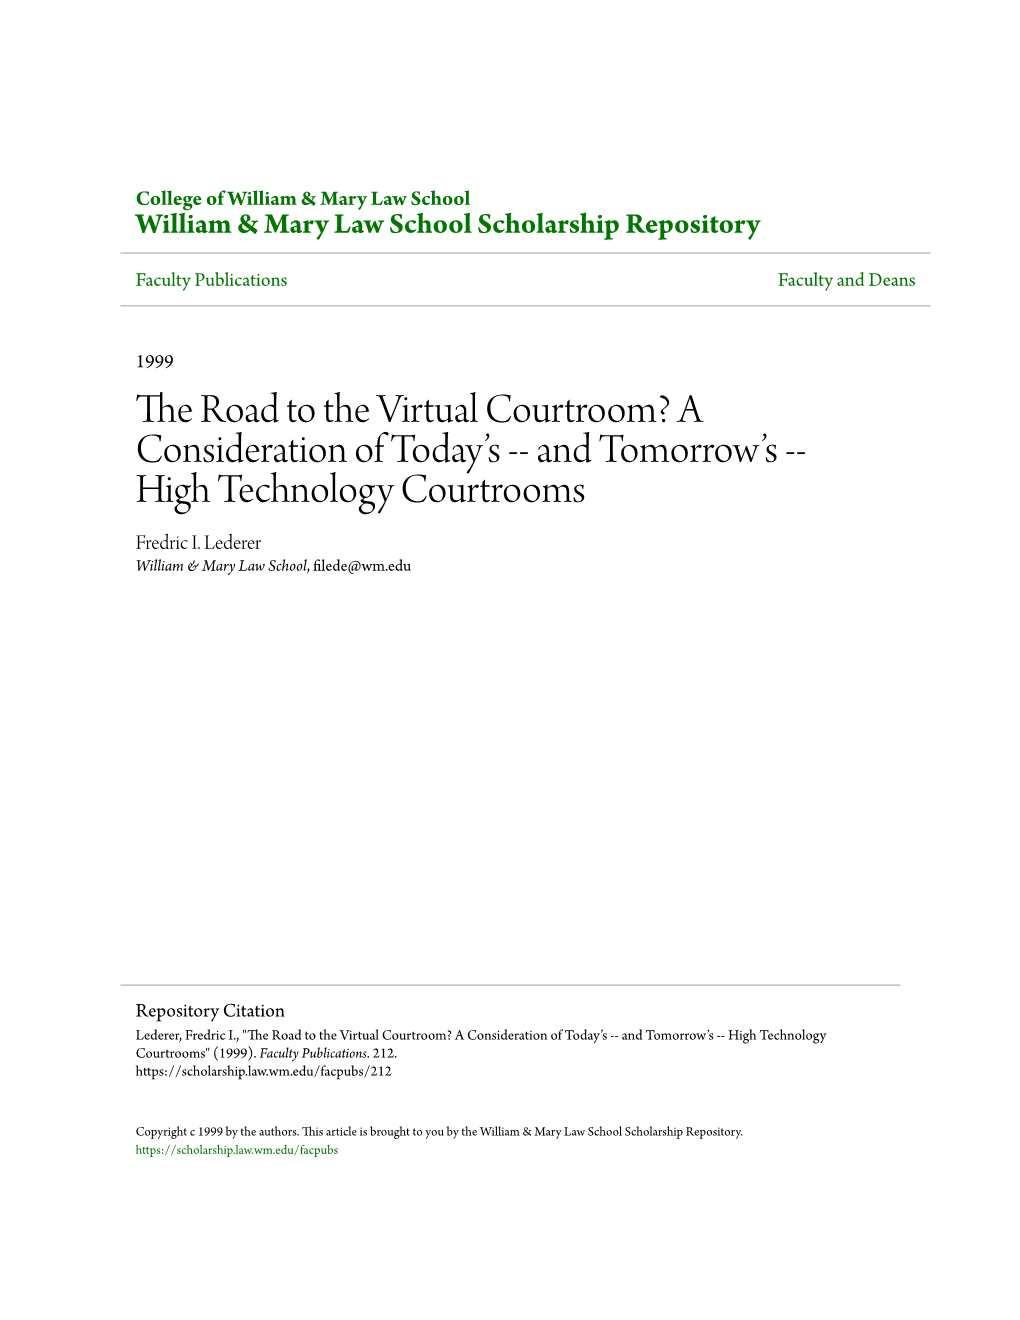 The Road to the Virtual Courtroom? a Consideration of Today's